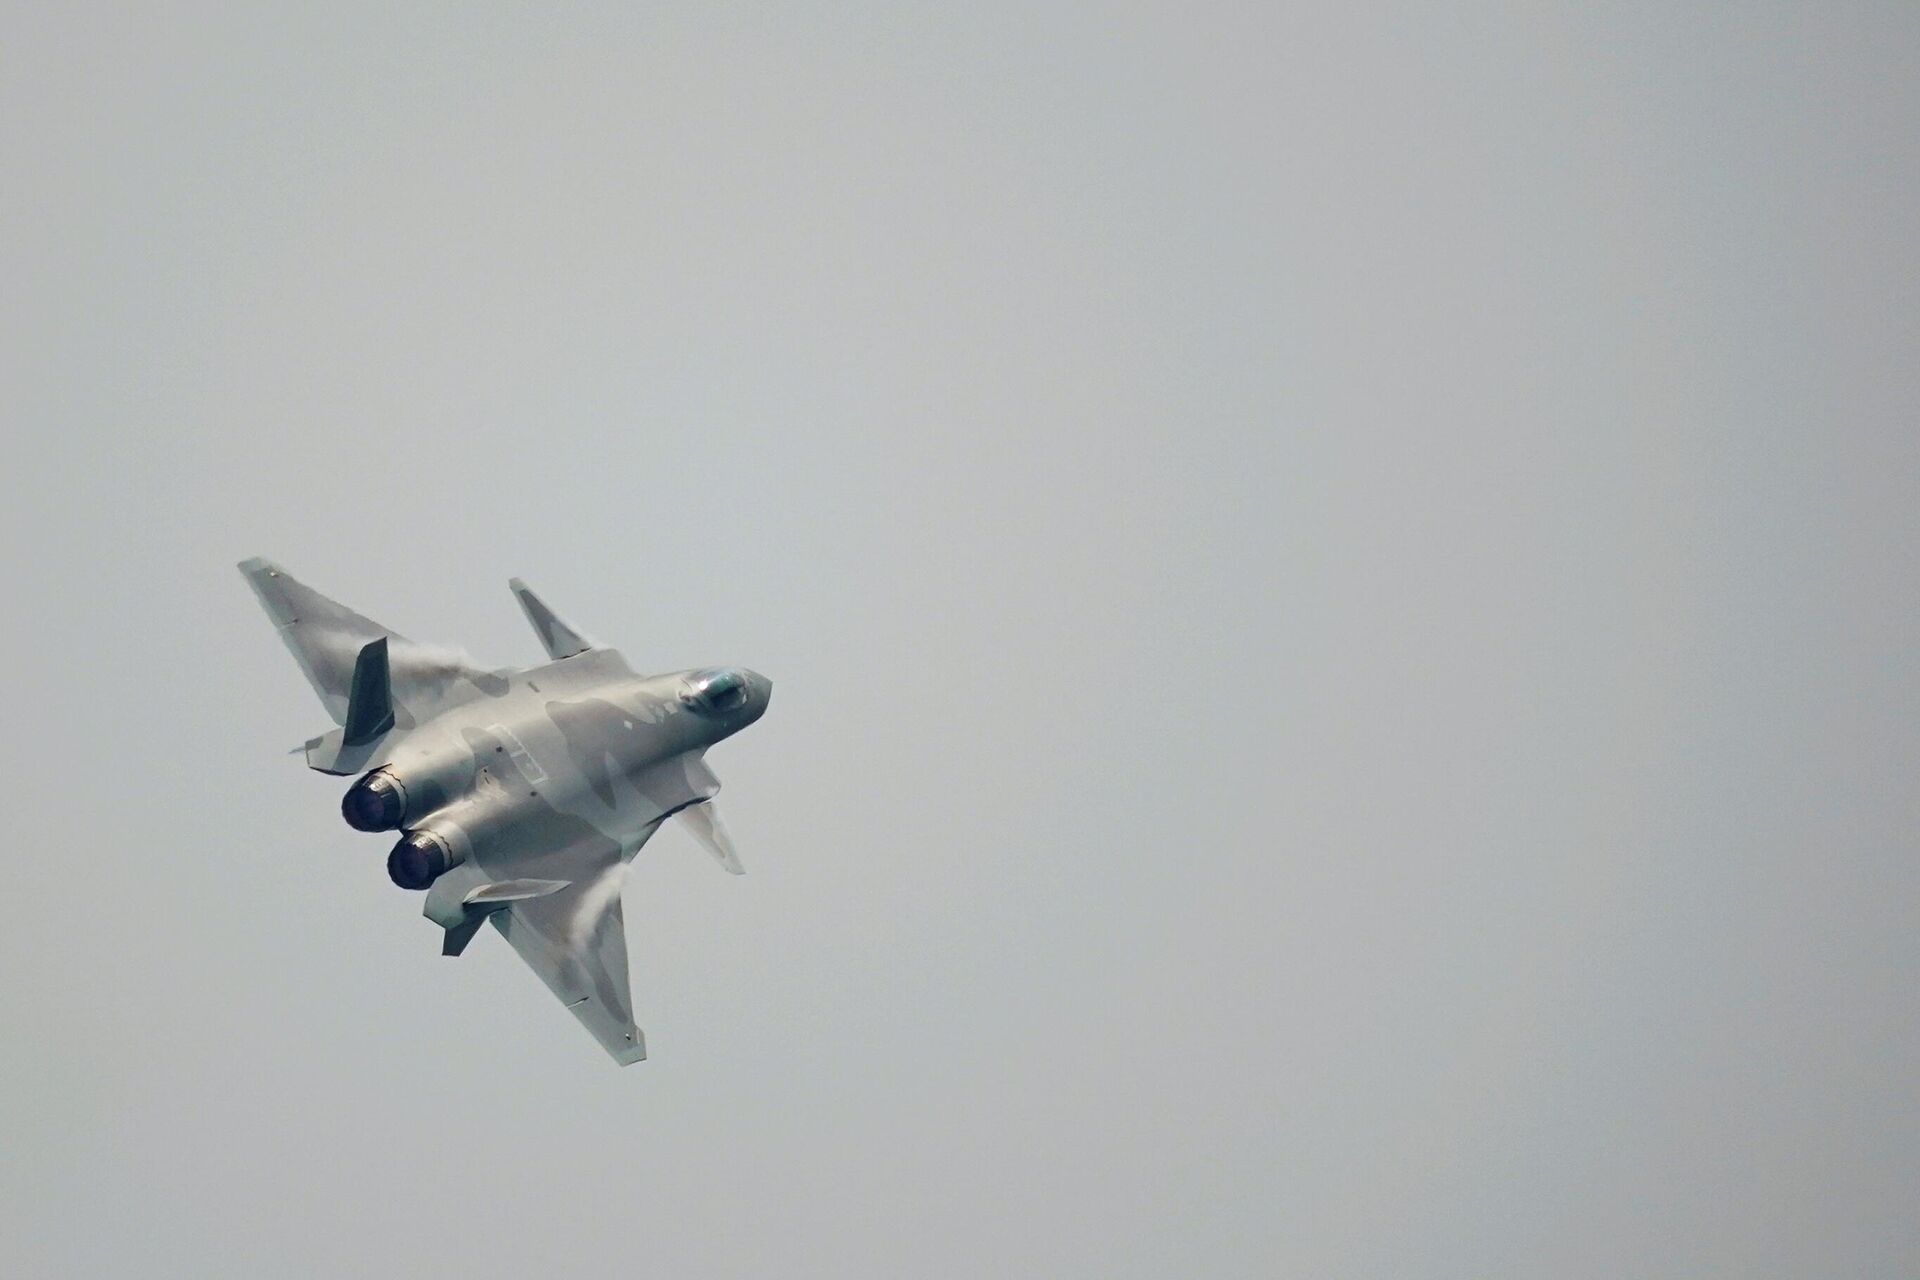 A J-20 stealth fighter jet of Chinese People's Liberation Army (PLA) Air Force performs at the China International Aviation and Aerospace Exhibition, or Airshow China, in Zhuhai, Guangdong province, China September 28, 2021 - Sputnik International, 1920, 29.09.2021